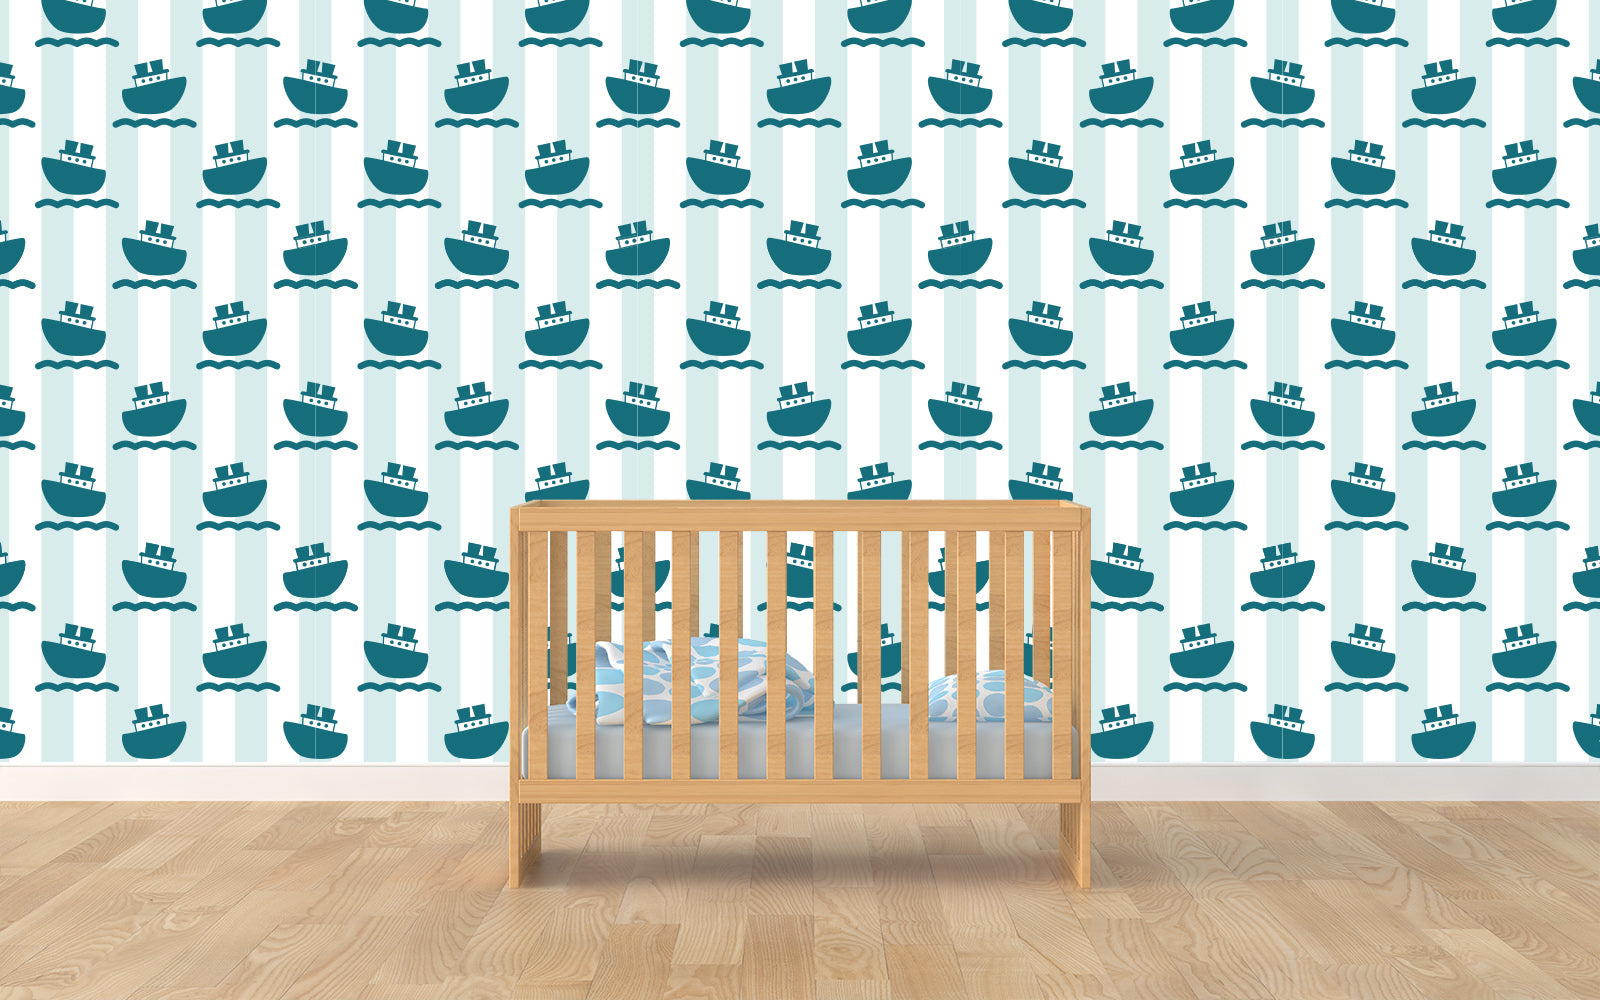 Simple patterns and bold, high-contrast visuals are ideal for early childhood development. Treat your wee cap'n to a nautical nursery!